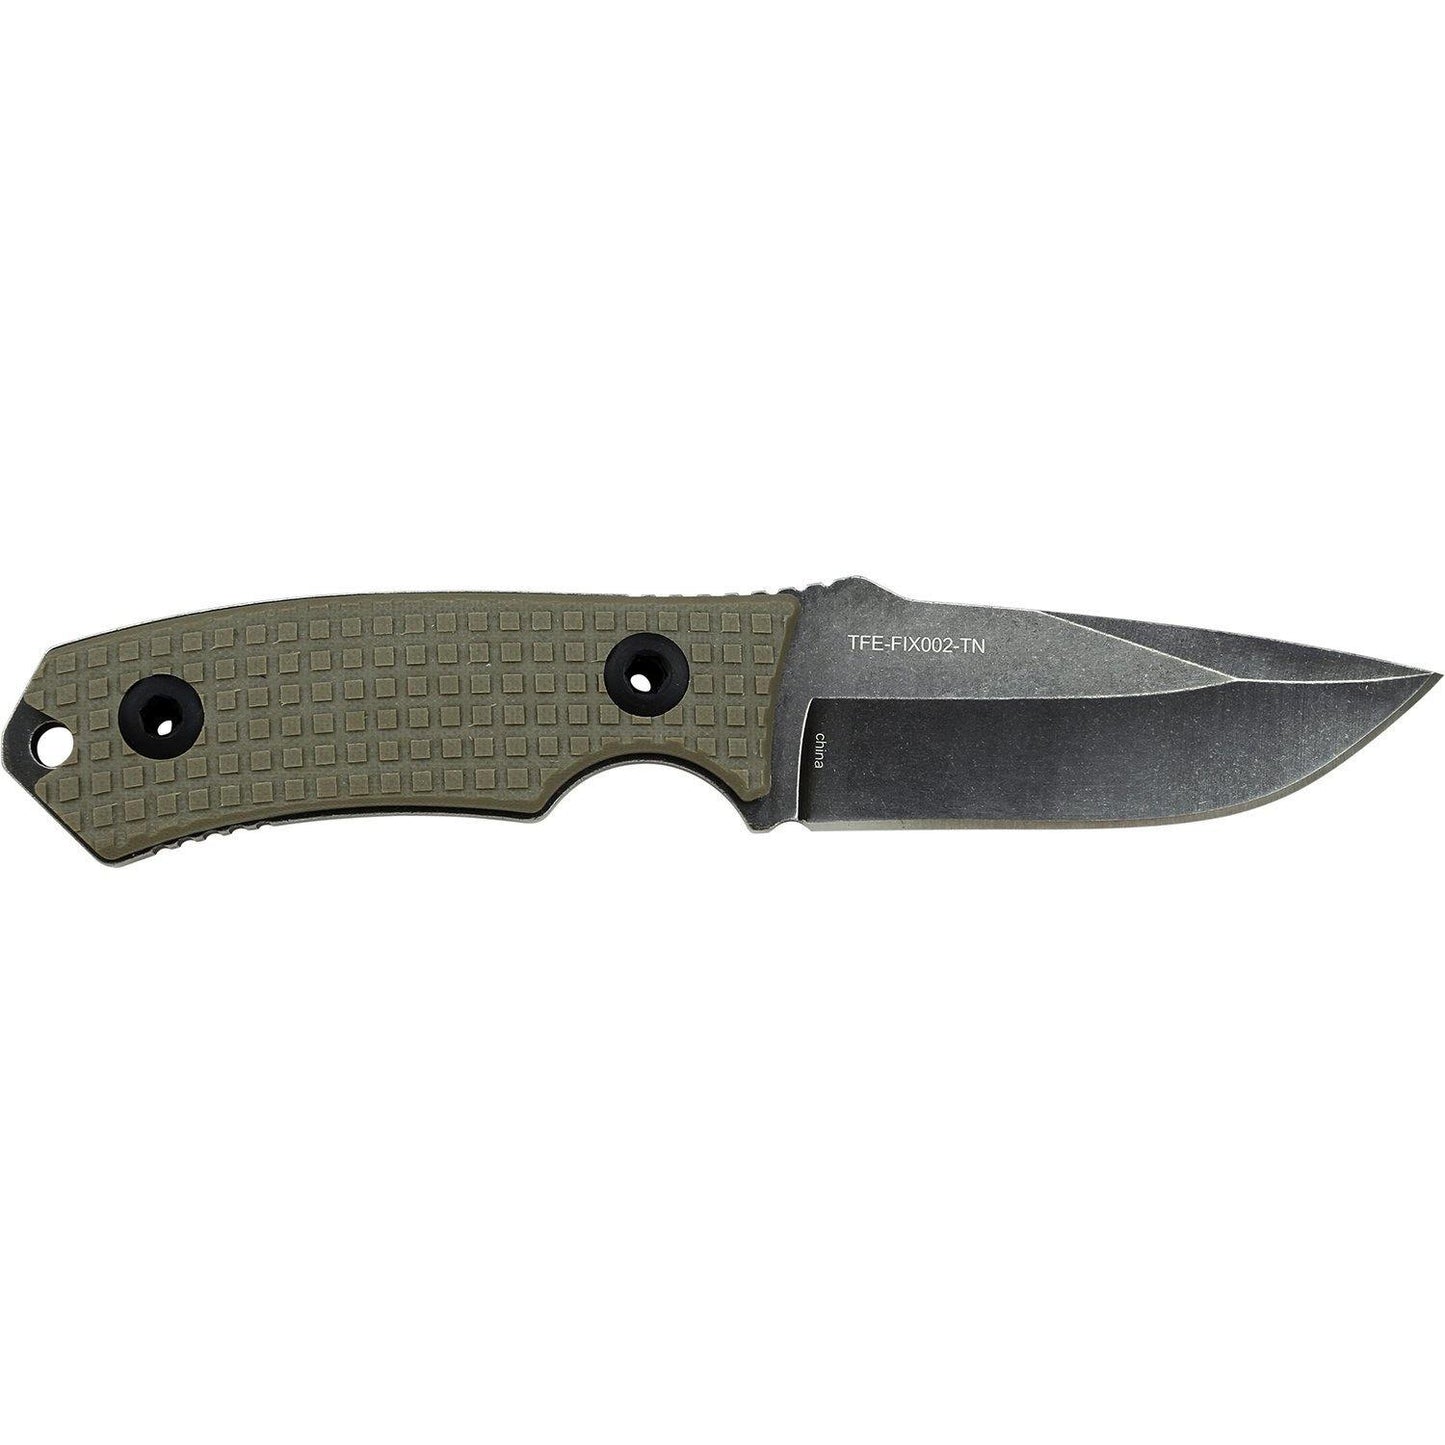 Tac-Force Evolution Tanto Stonewashed Fixed Blade Knife - 8 Inches Overall G10 Handle #tfe-Fix002-Tn - Xhunter New Zealand